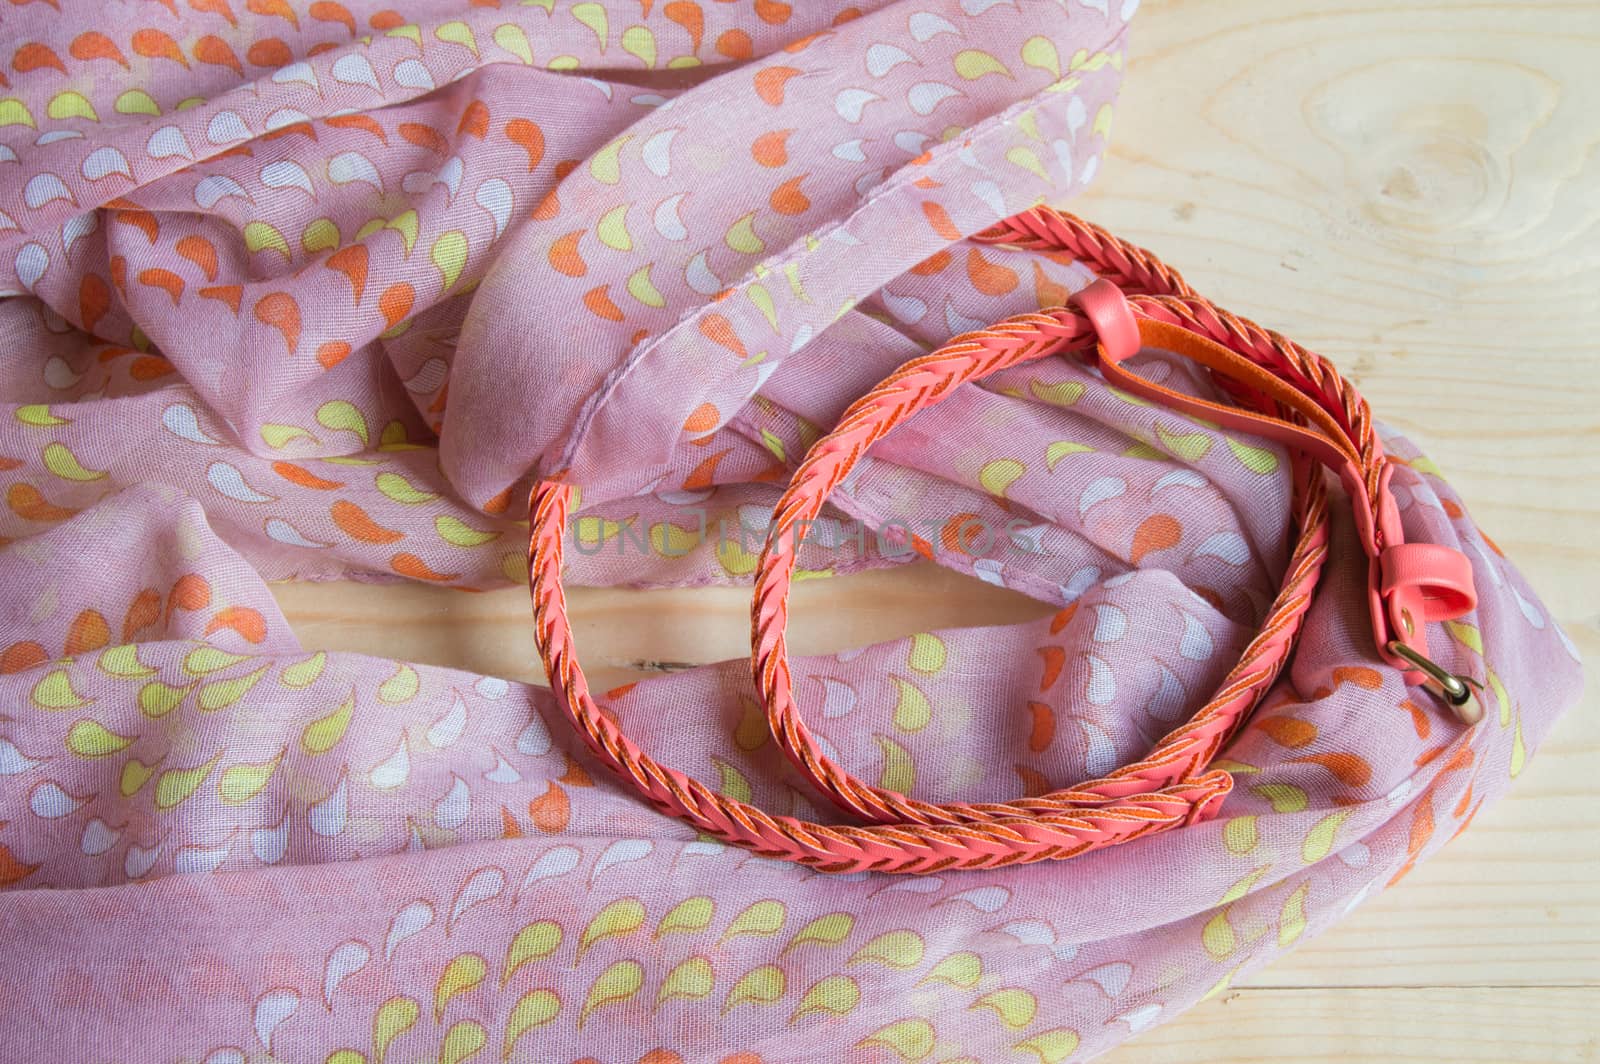 Fashionable pink accessories on wooden background - scarf, belt.